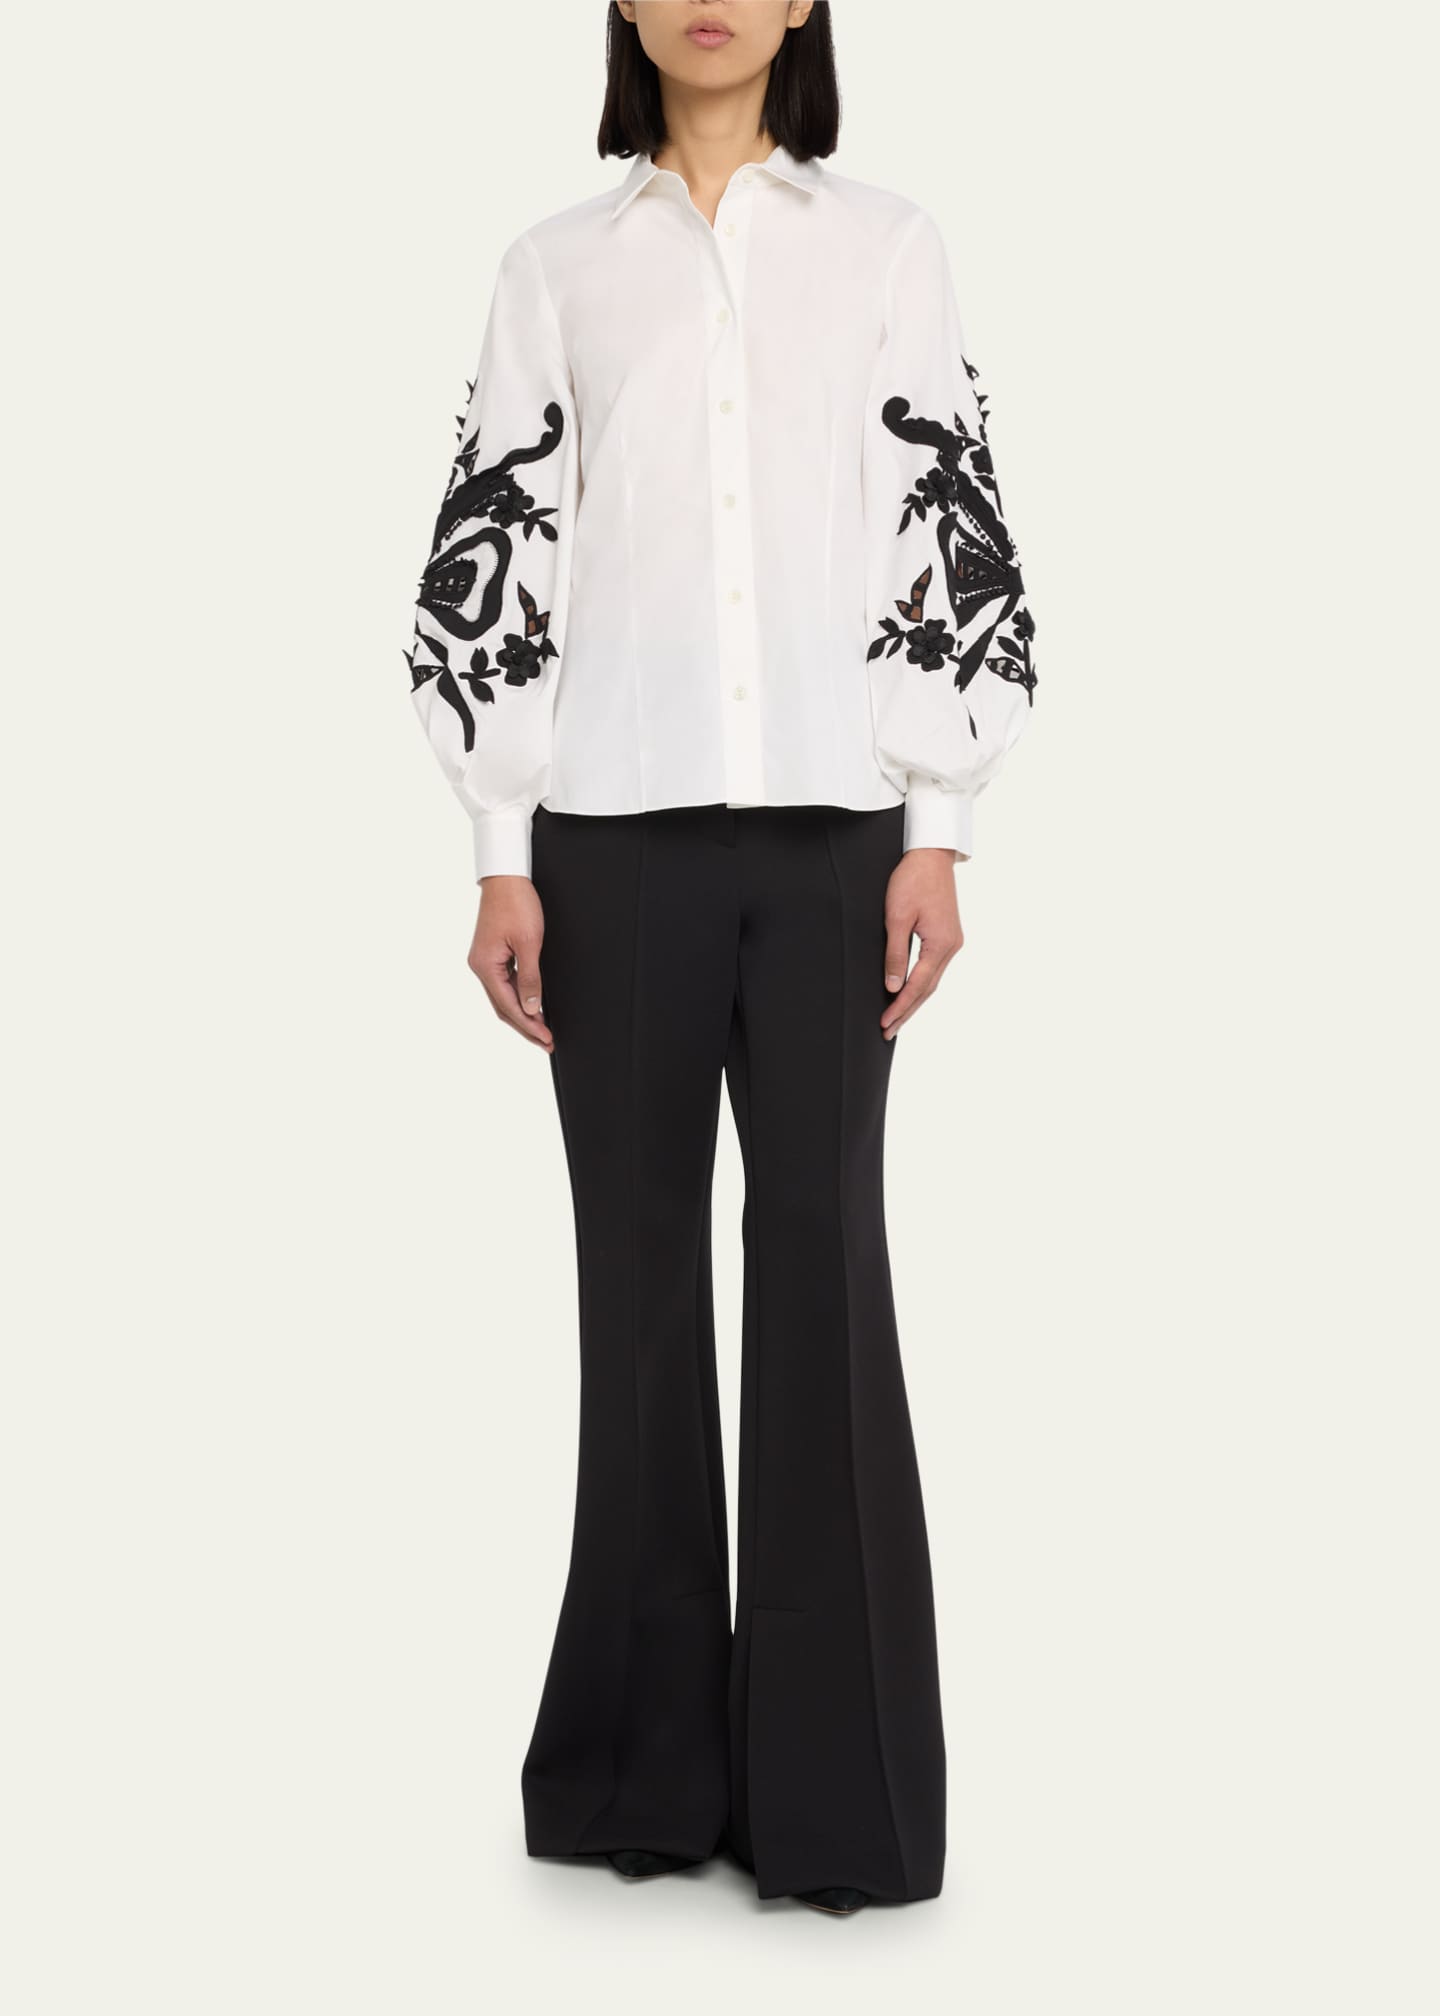 Carolina Herrera Embroidered Puff-Sleeve Button-Front Blouse - Bergdorf ...